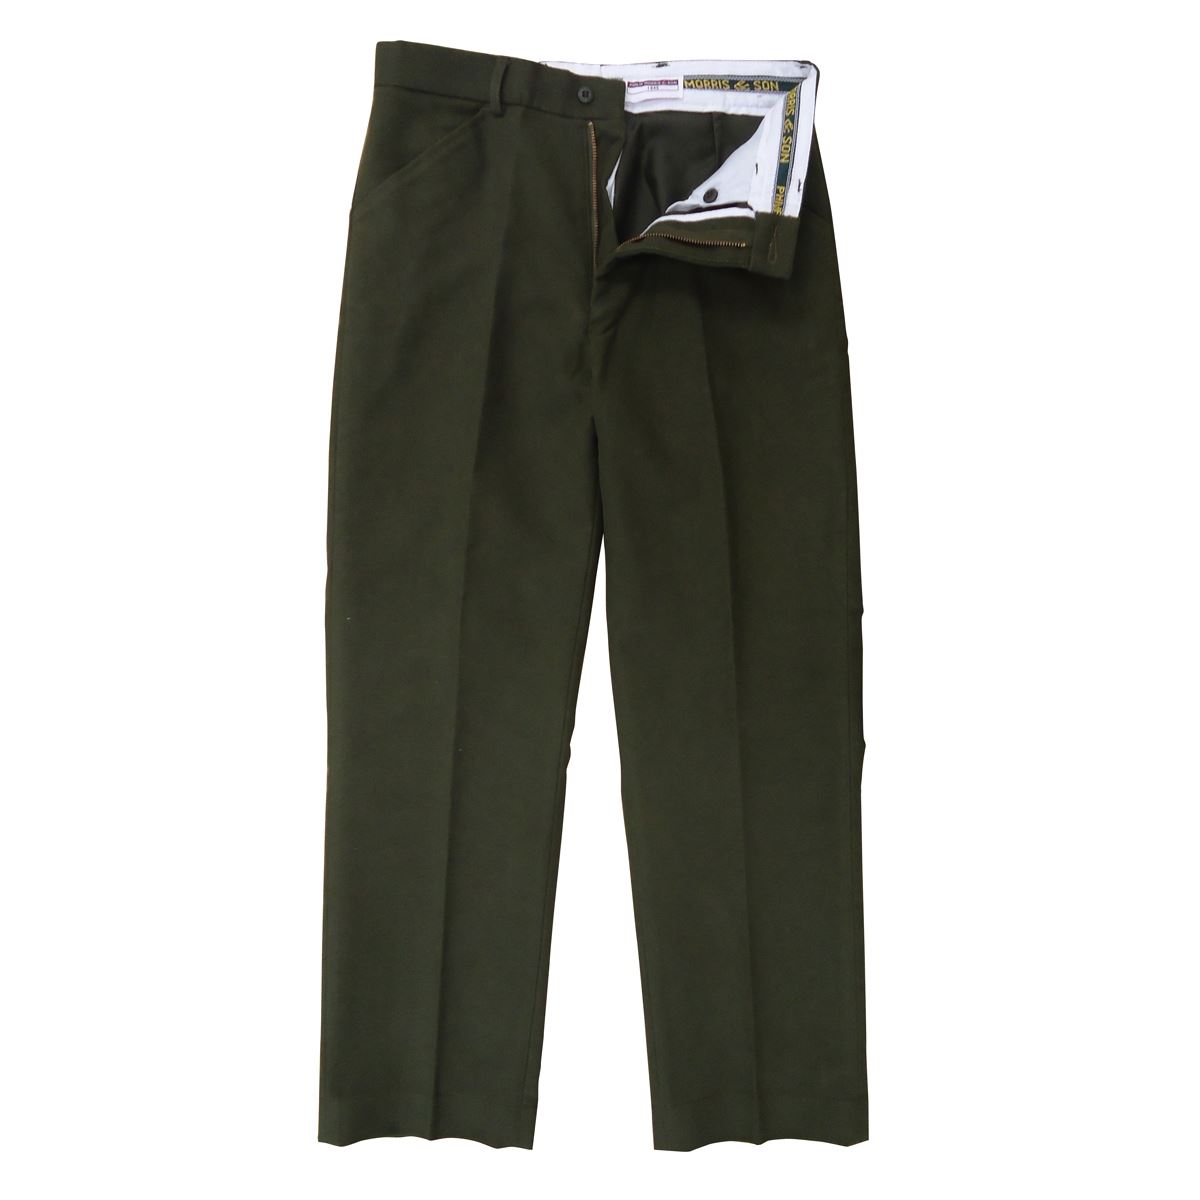 What is the care routine for Heritage 1845 mens moleskin trousers?